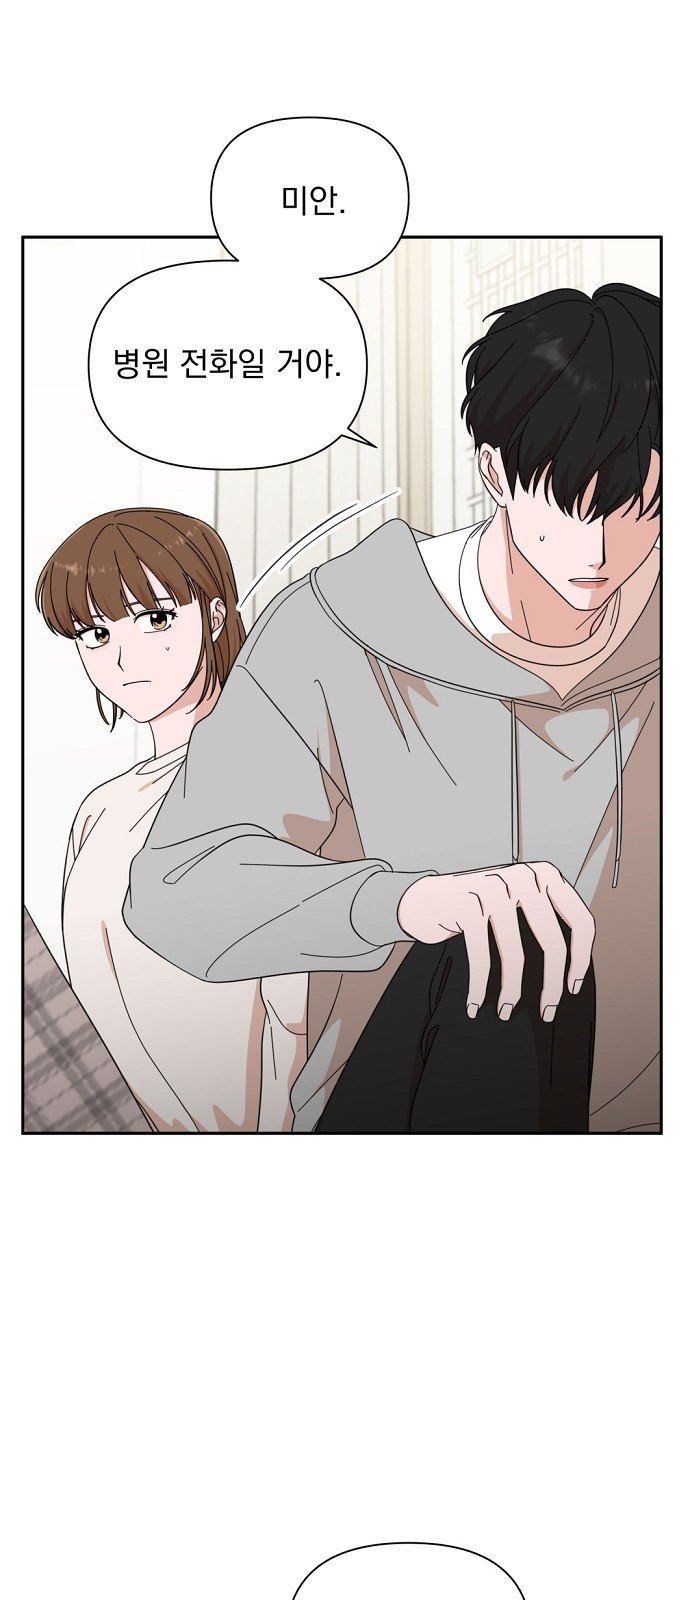 The Man With Pretty Lips - Chapter 14 - Page 4